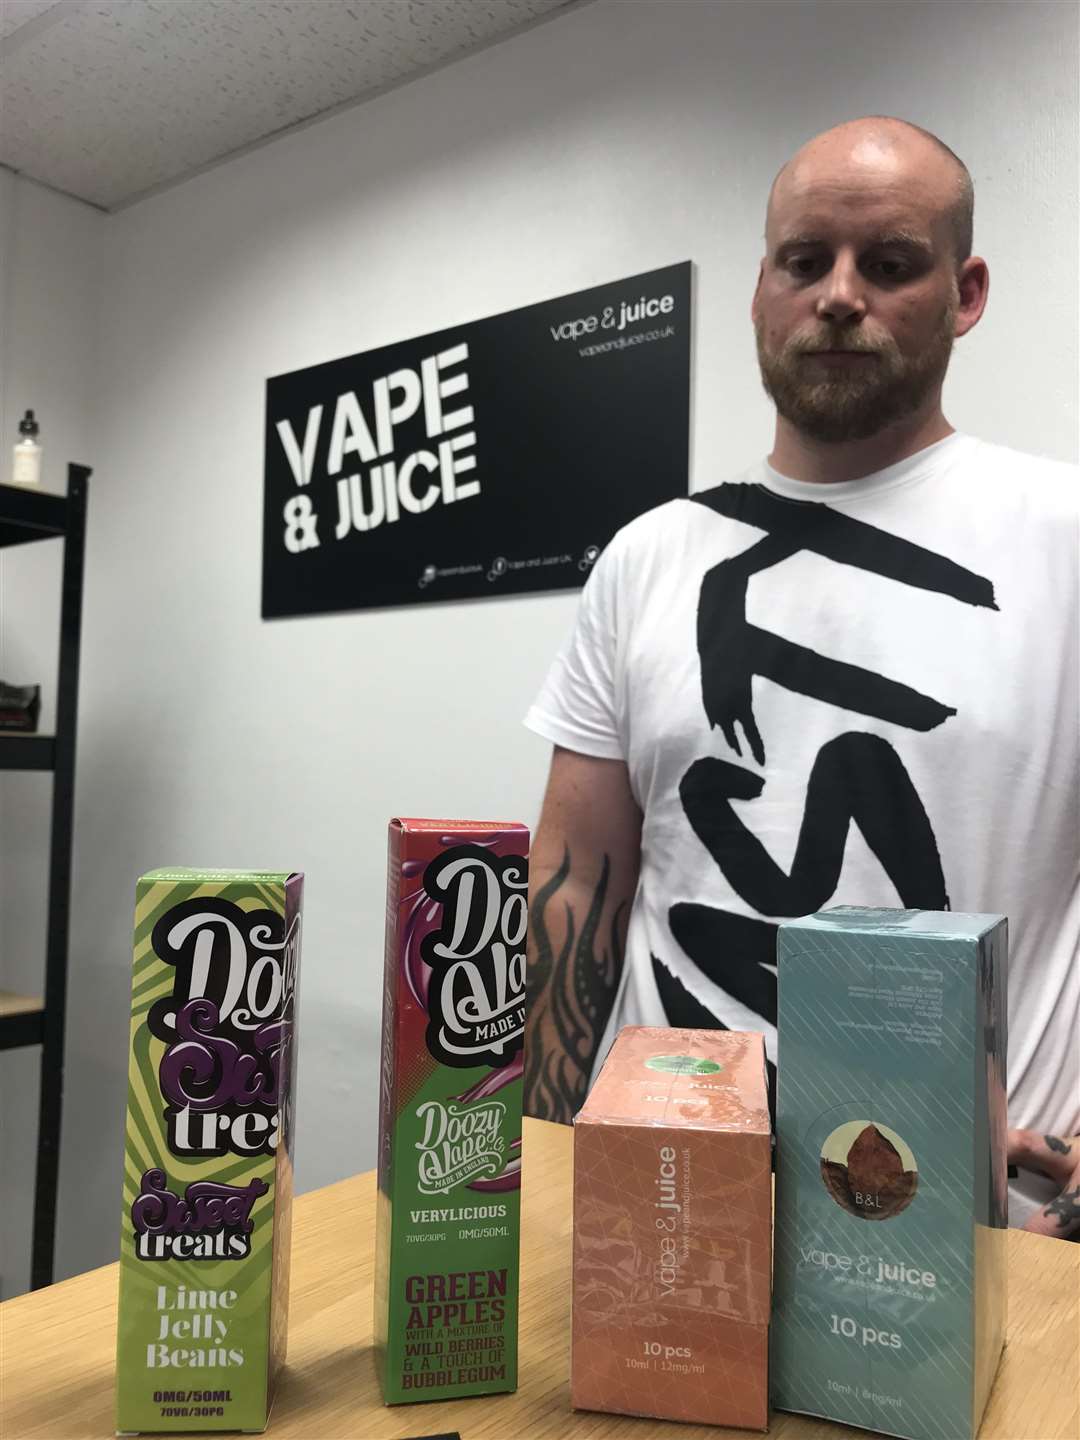 Robb Riddle with Vape and Juice merchandise